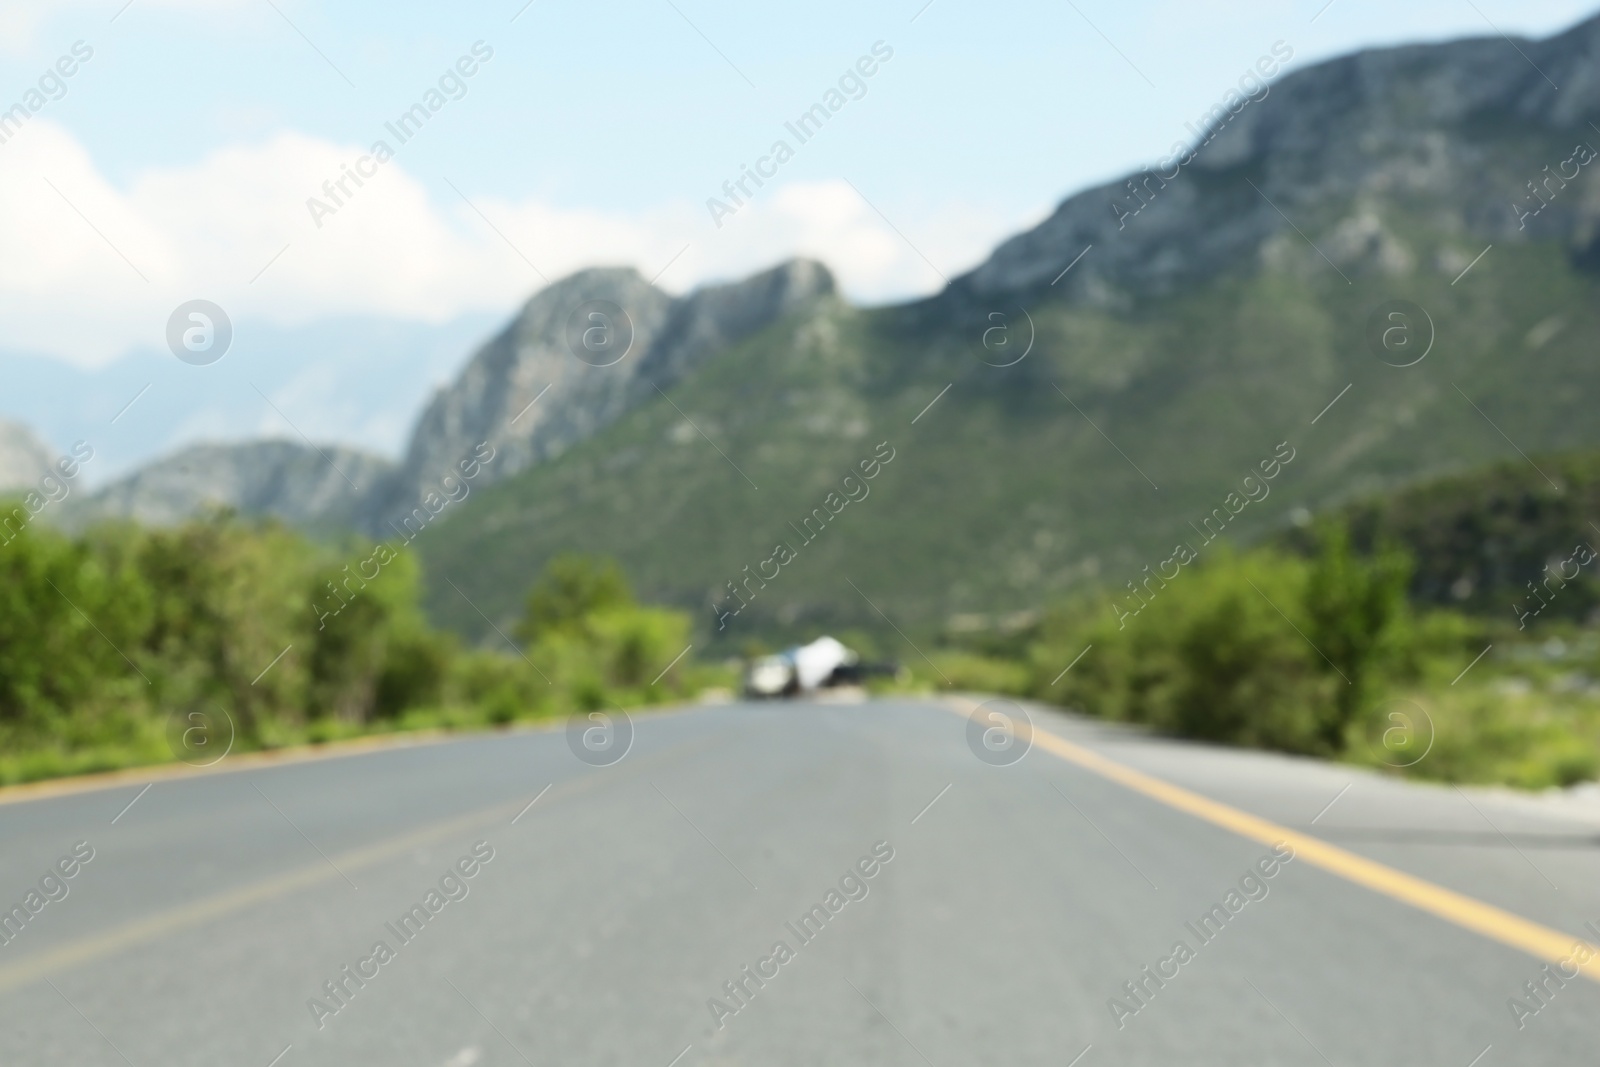 Photo of Big mountains and bushes near road under cloudy sky, blurred view